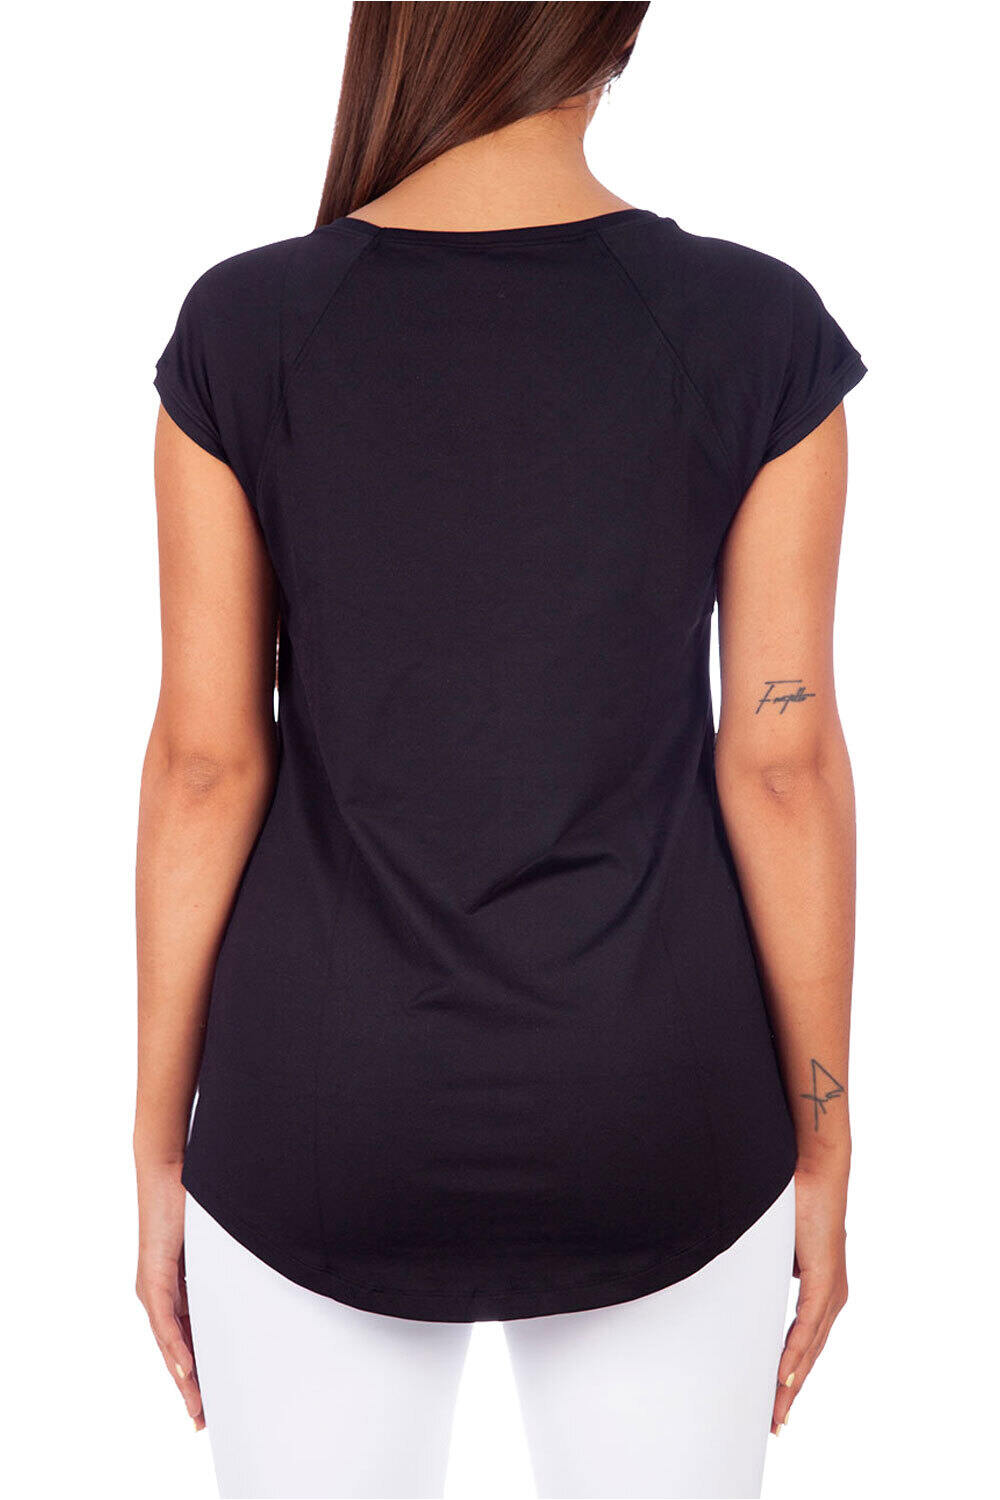 Ditchil camisetas fitness mujer EASE T-SHIRT vista trasera